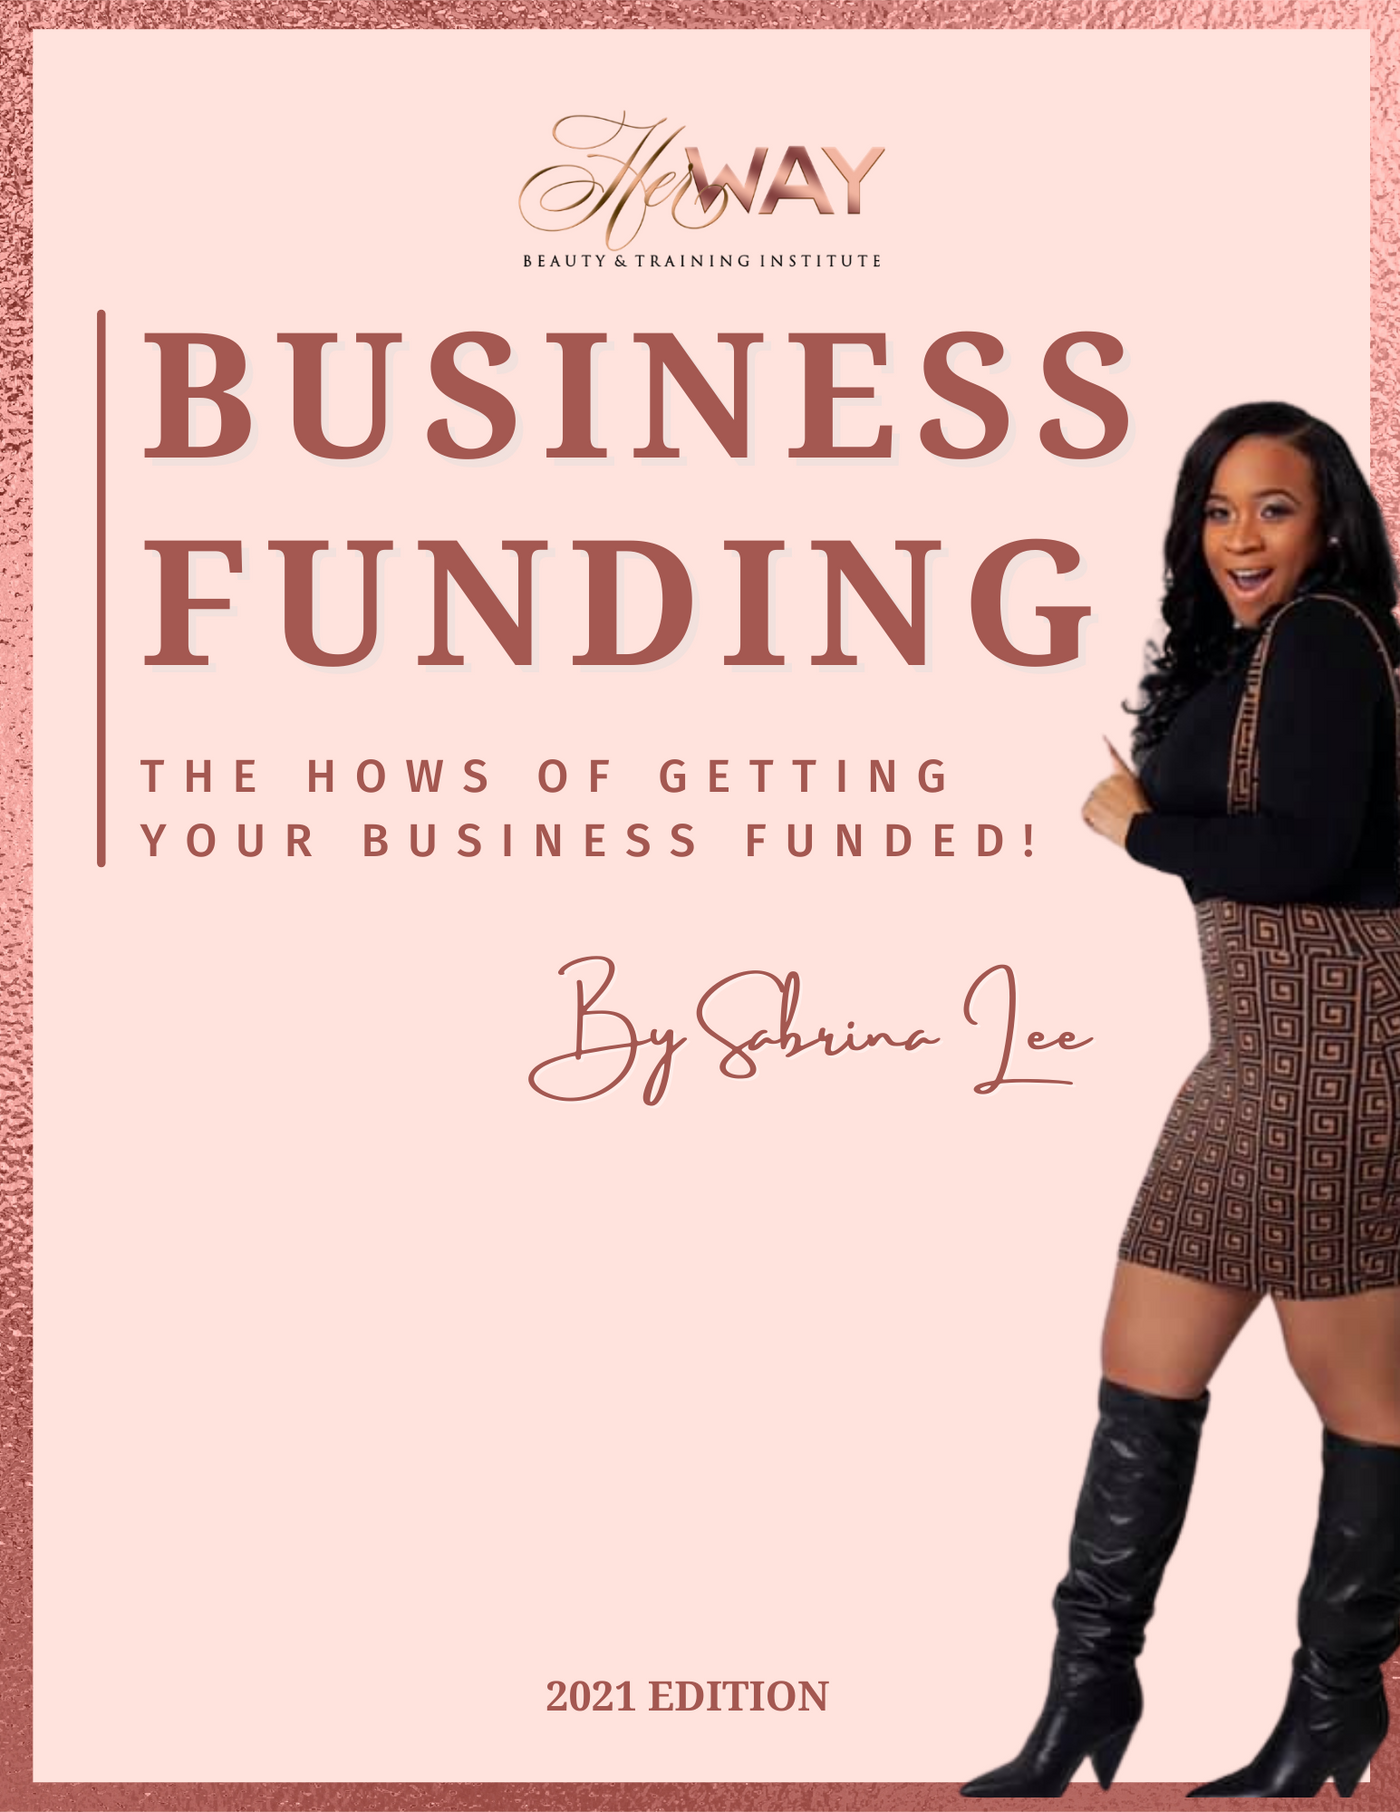 Business Funding - The How's of Getting Your Business Funded